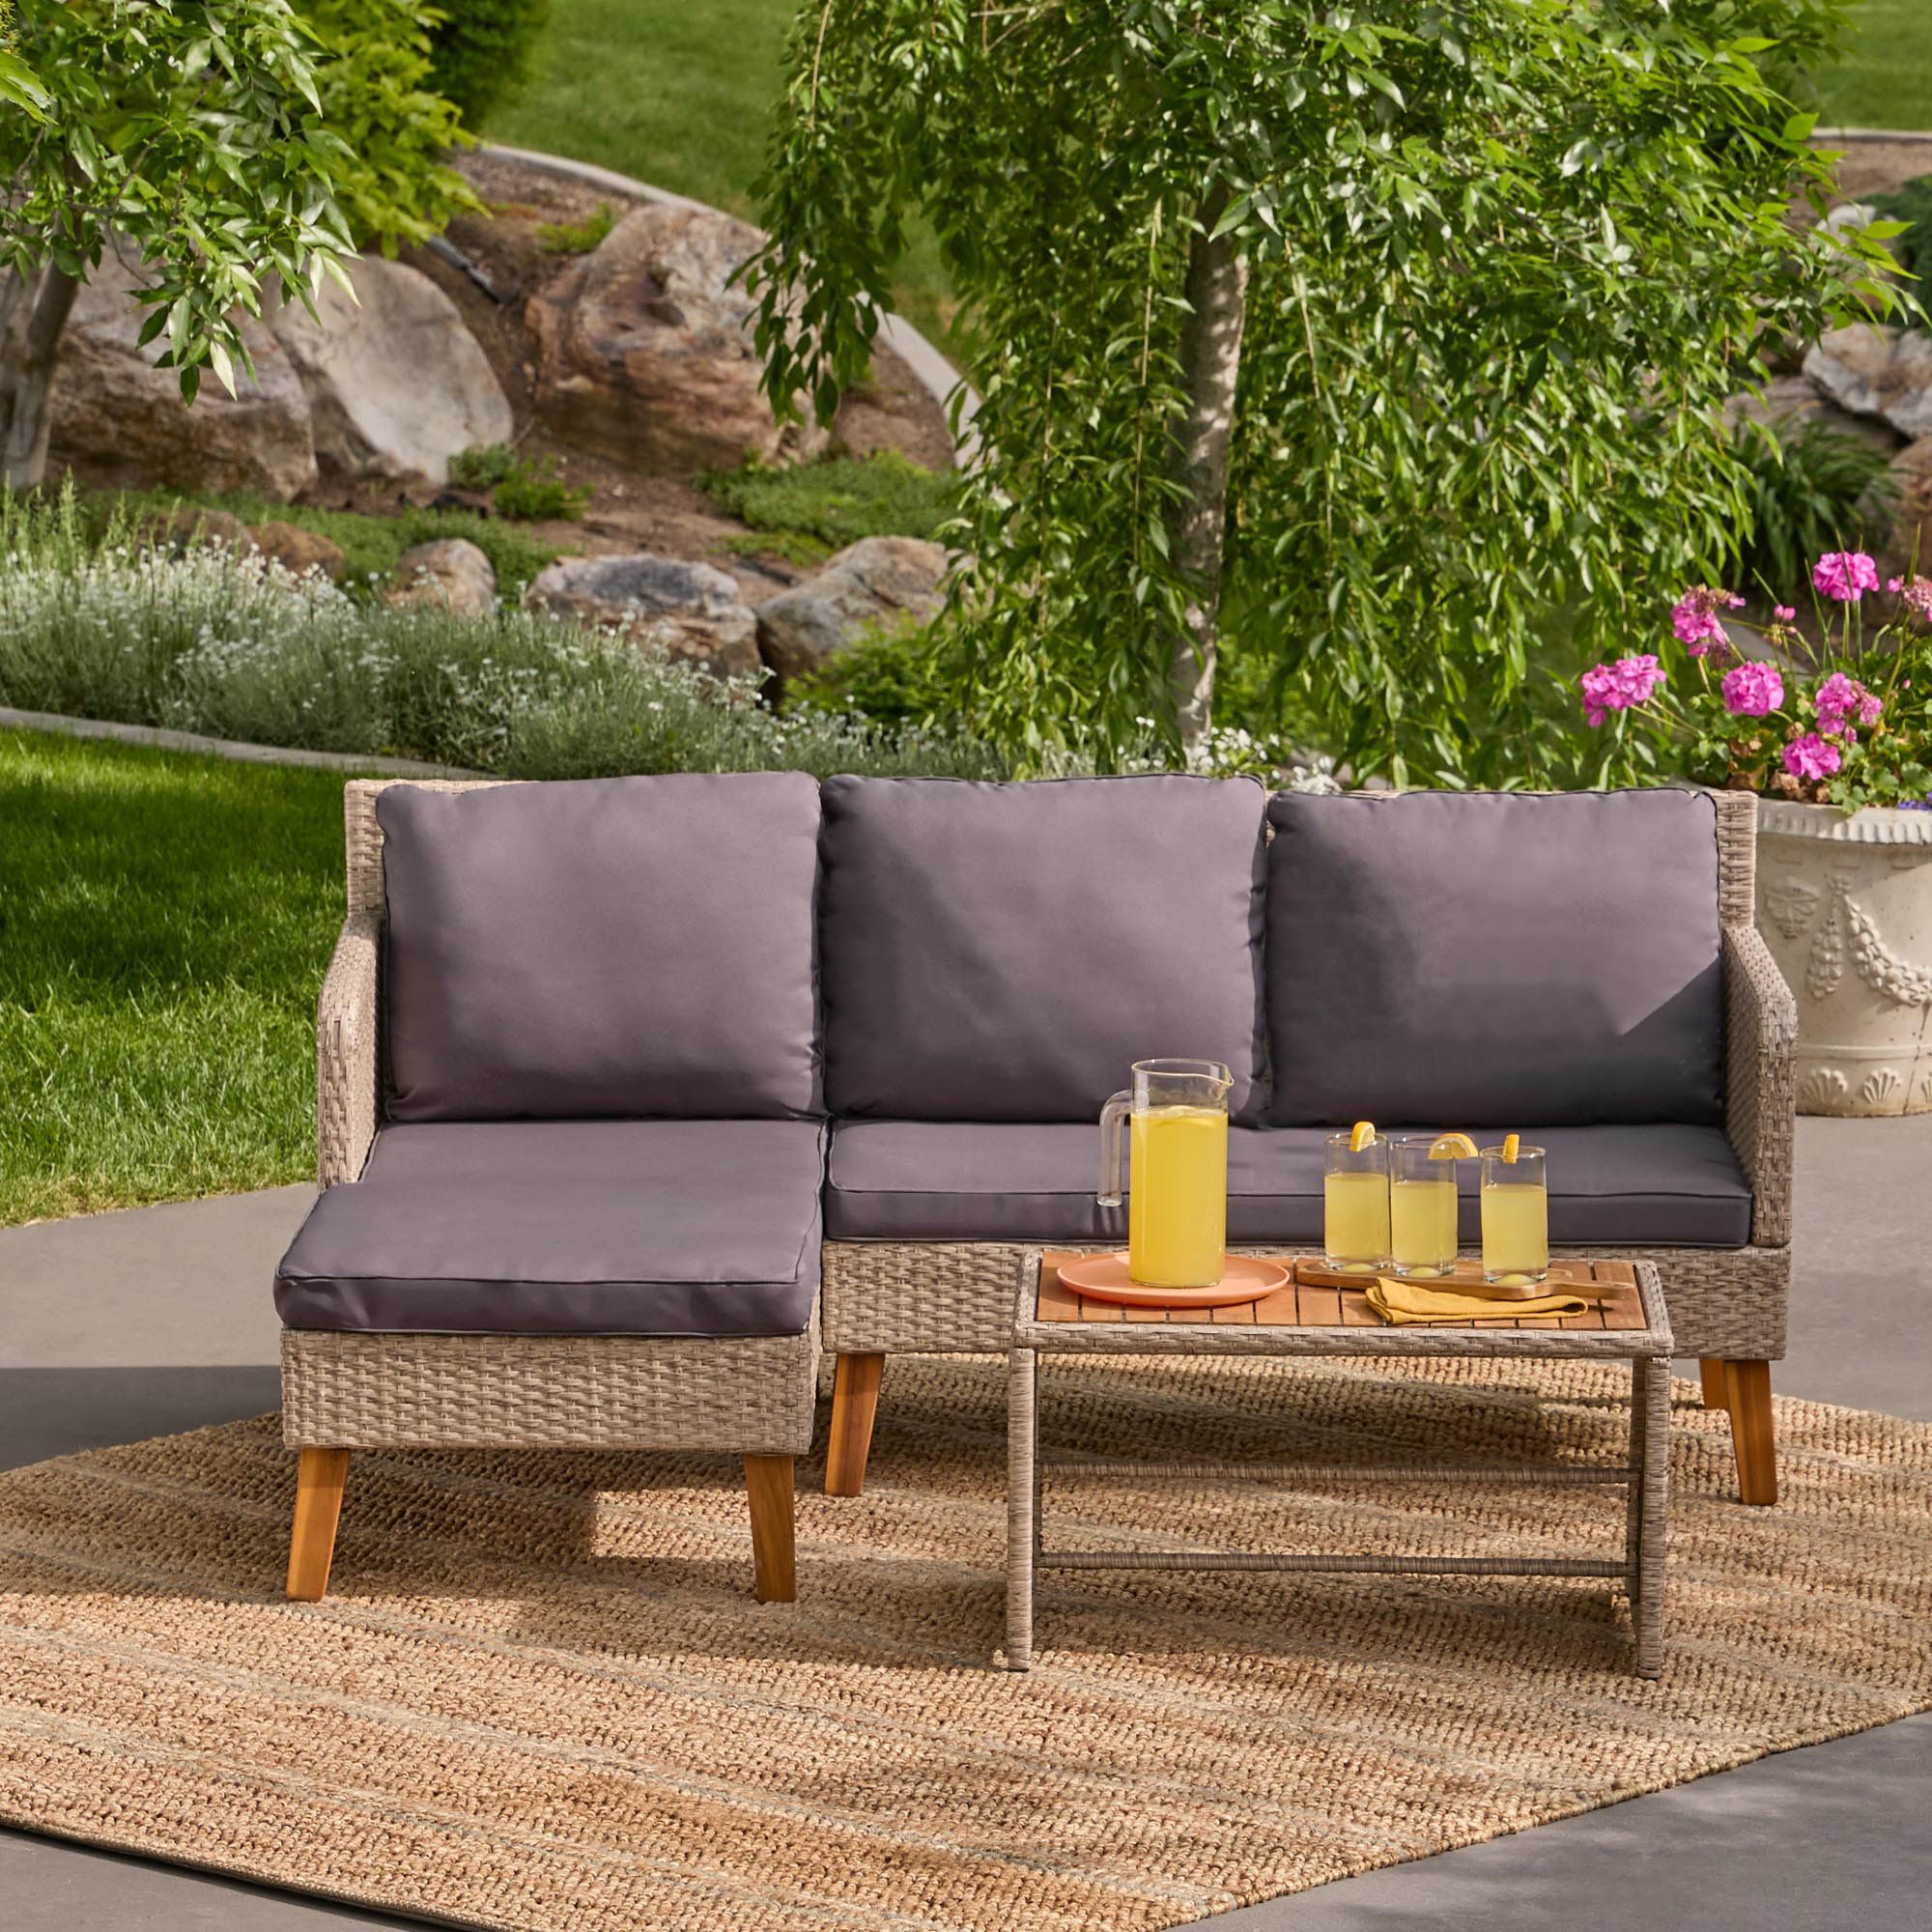 Wayfair Inside All Weather Wicker Sectional Seating Group (View 5 of 15)